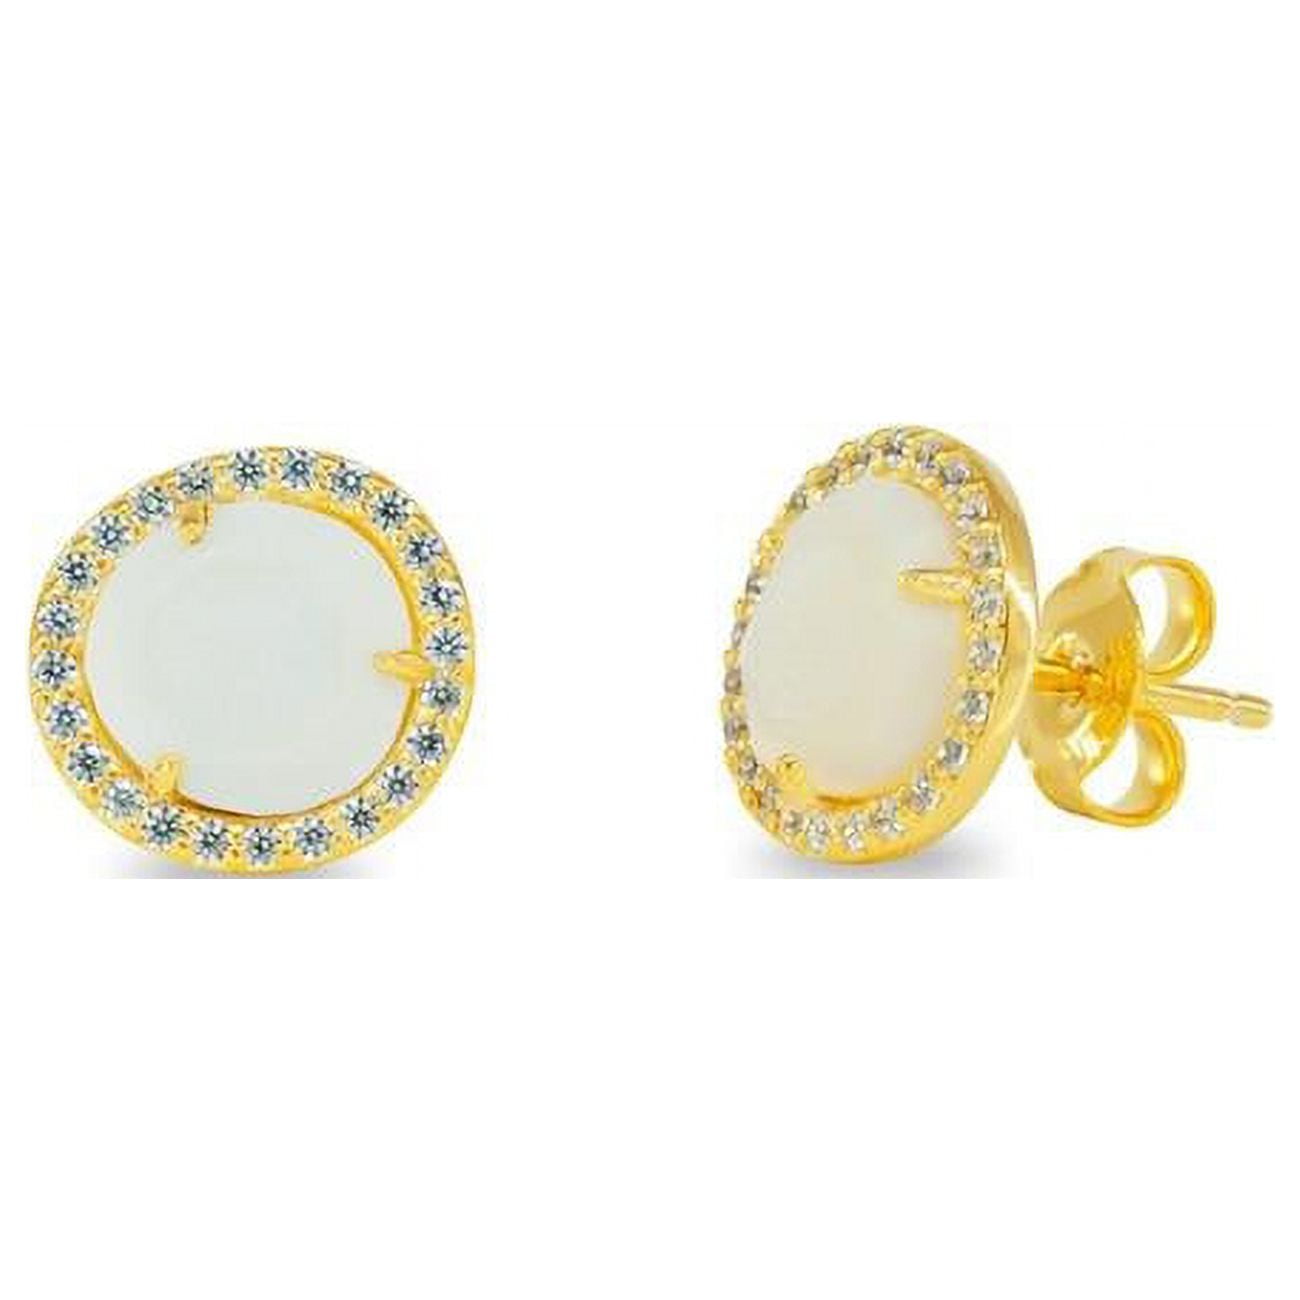 Picture of Fronay 2G5376M Mother of Pearl Stud Earrings in Gold Over Silver